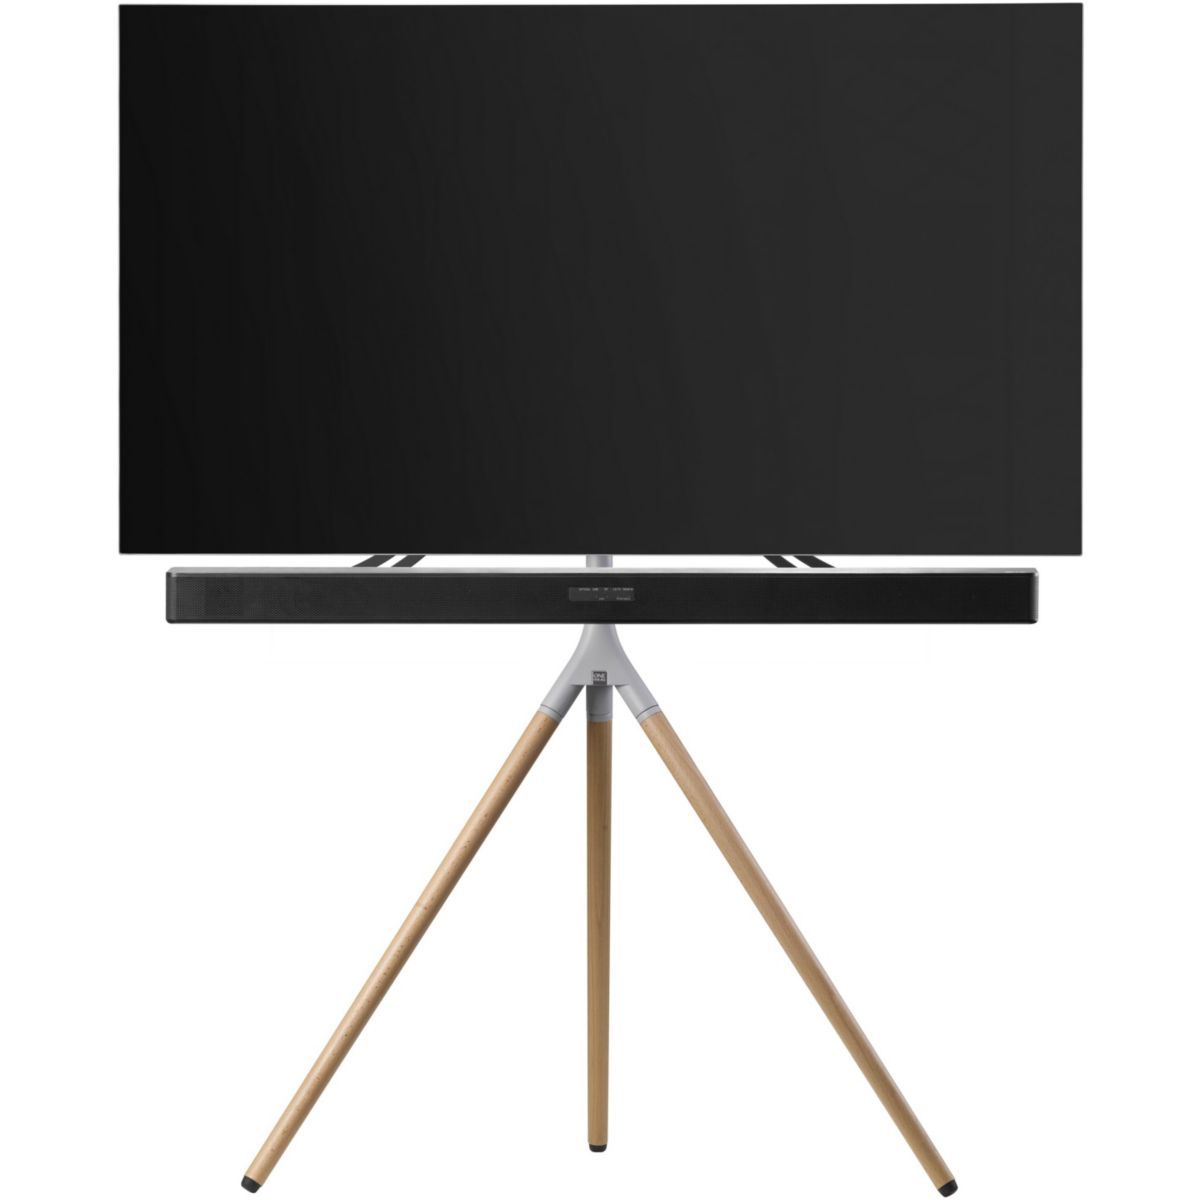 Support mural TV ONE FOR ALL TV solid fixe 19/43 pouces VESA200